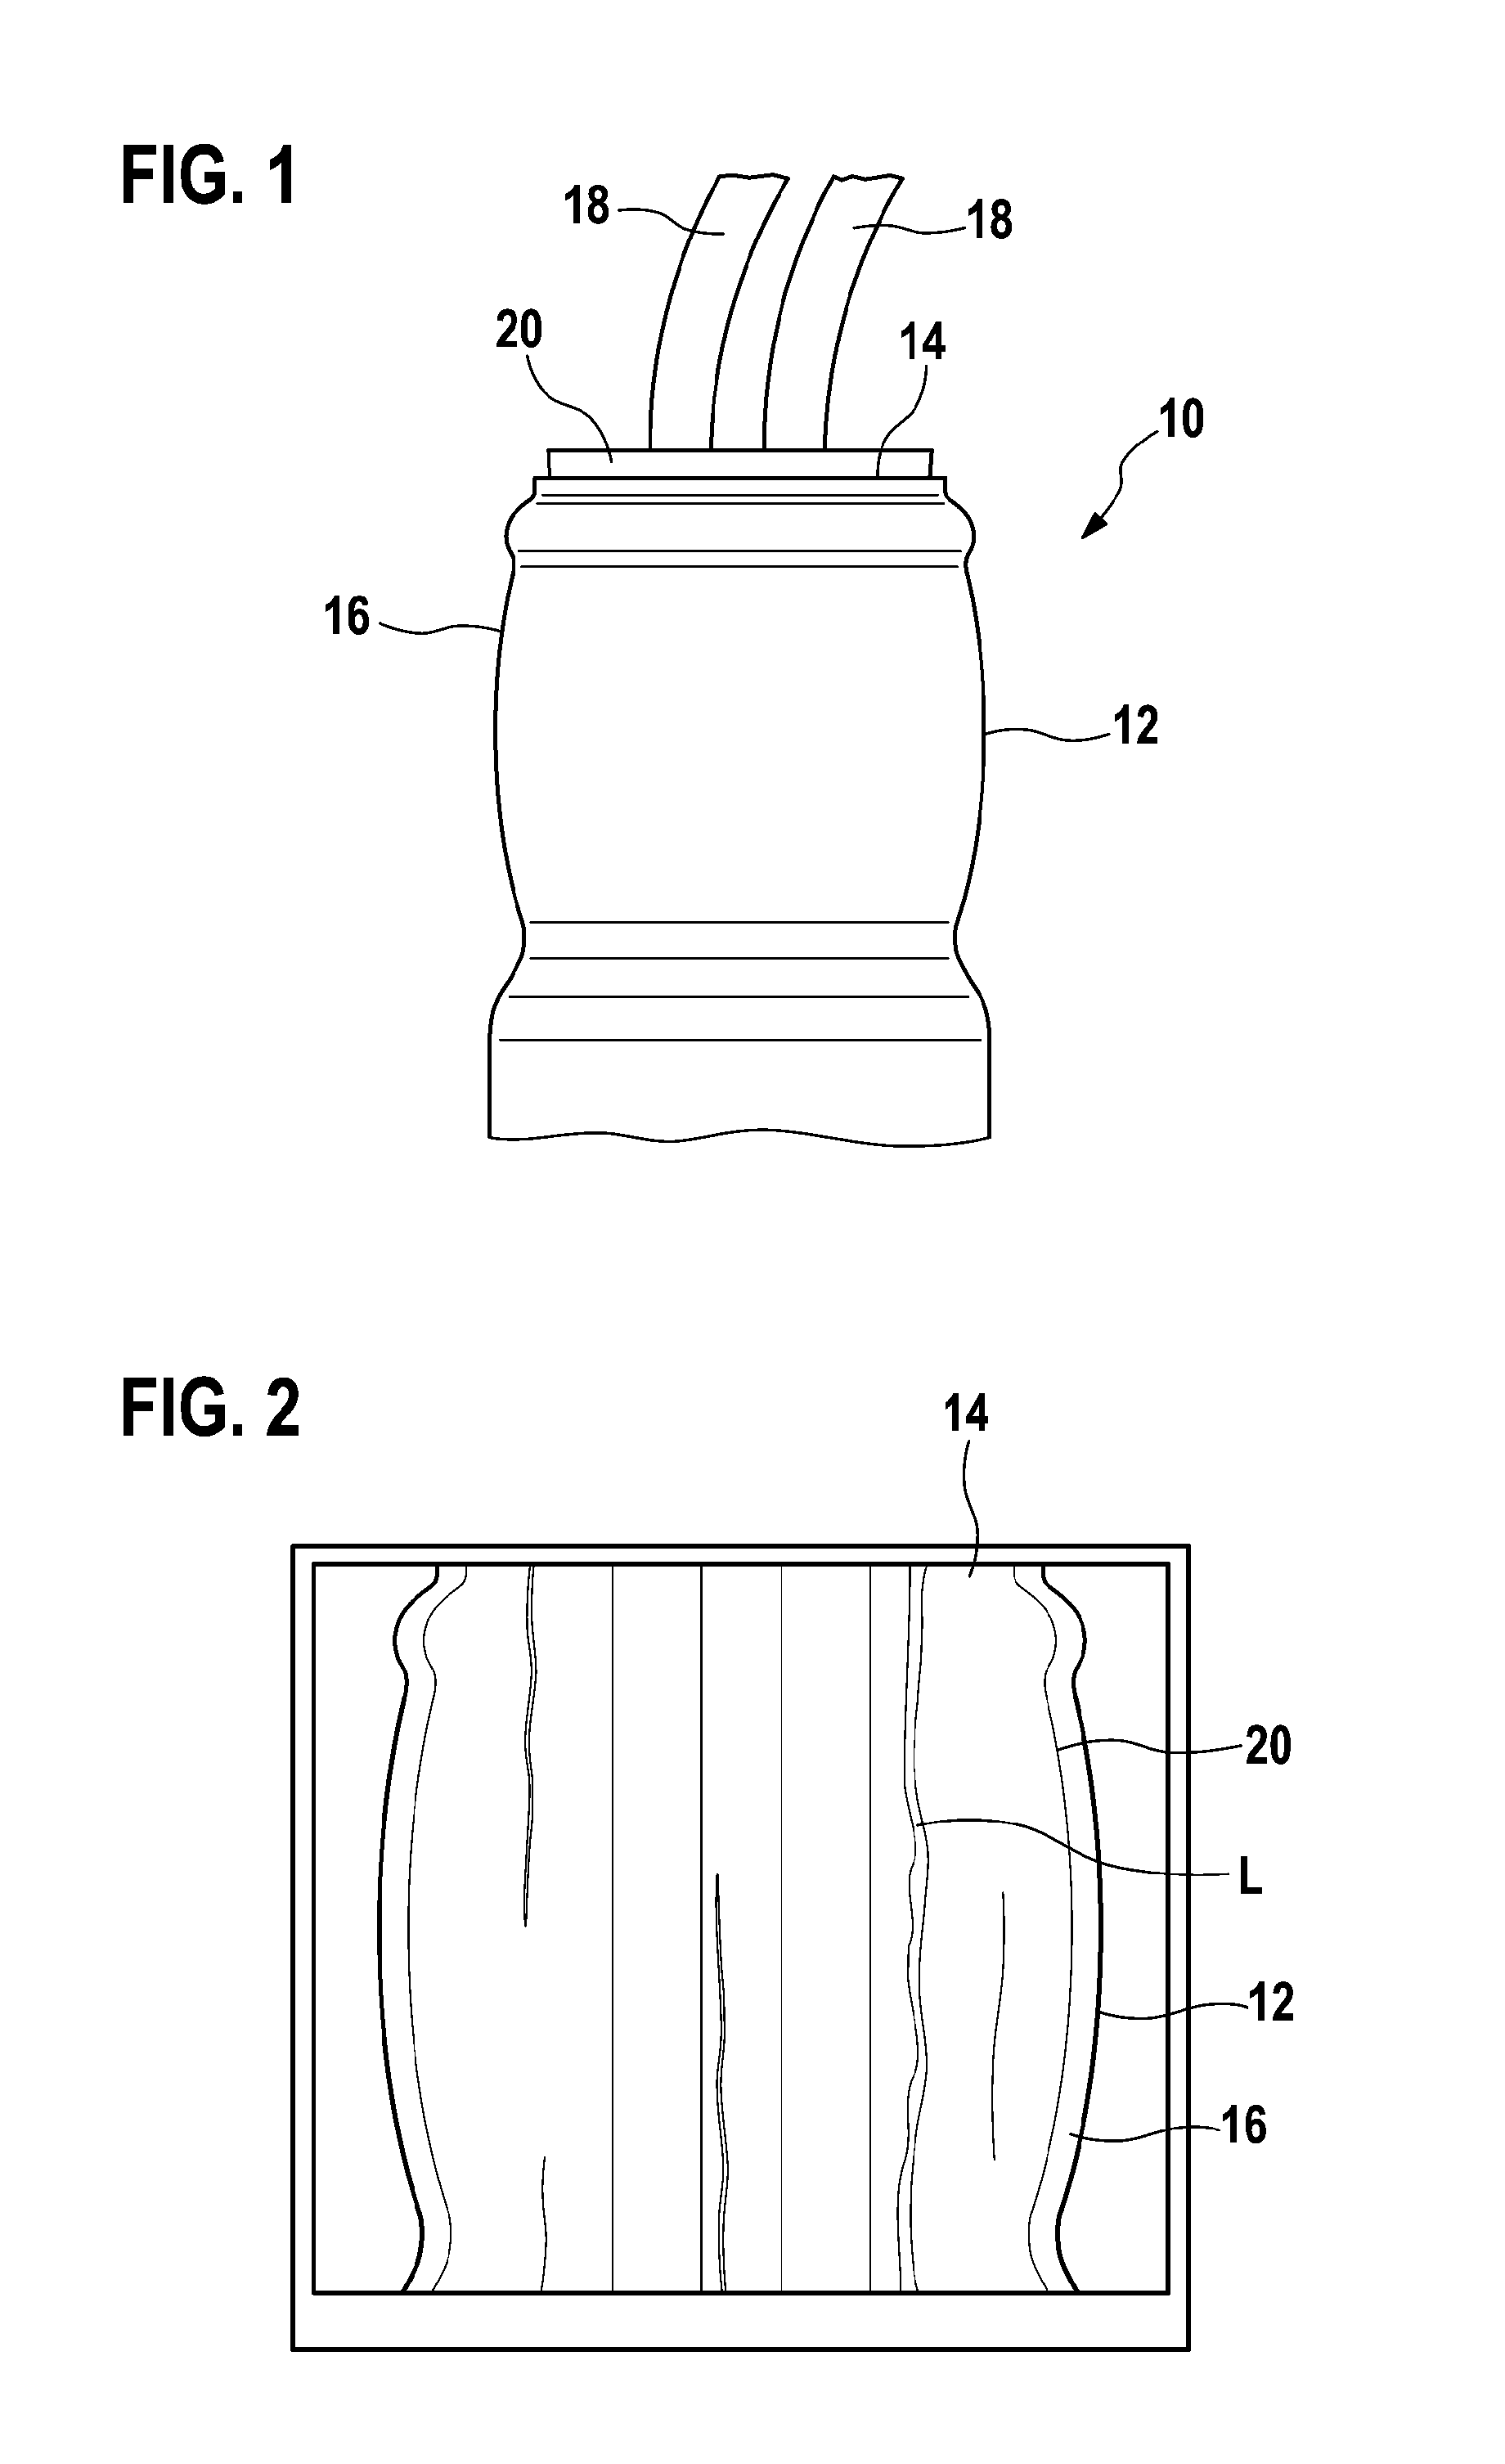 Sensor having a housing seal made of synthetic rubbers having differing elasticity